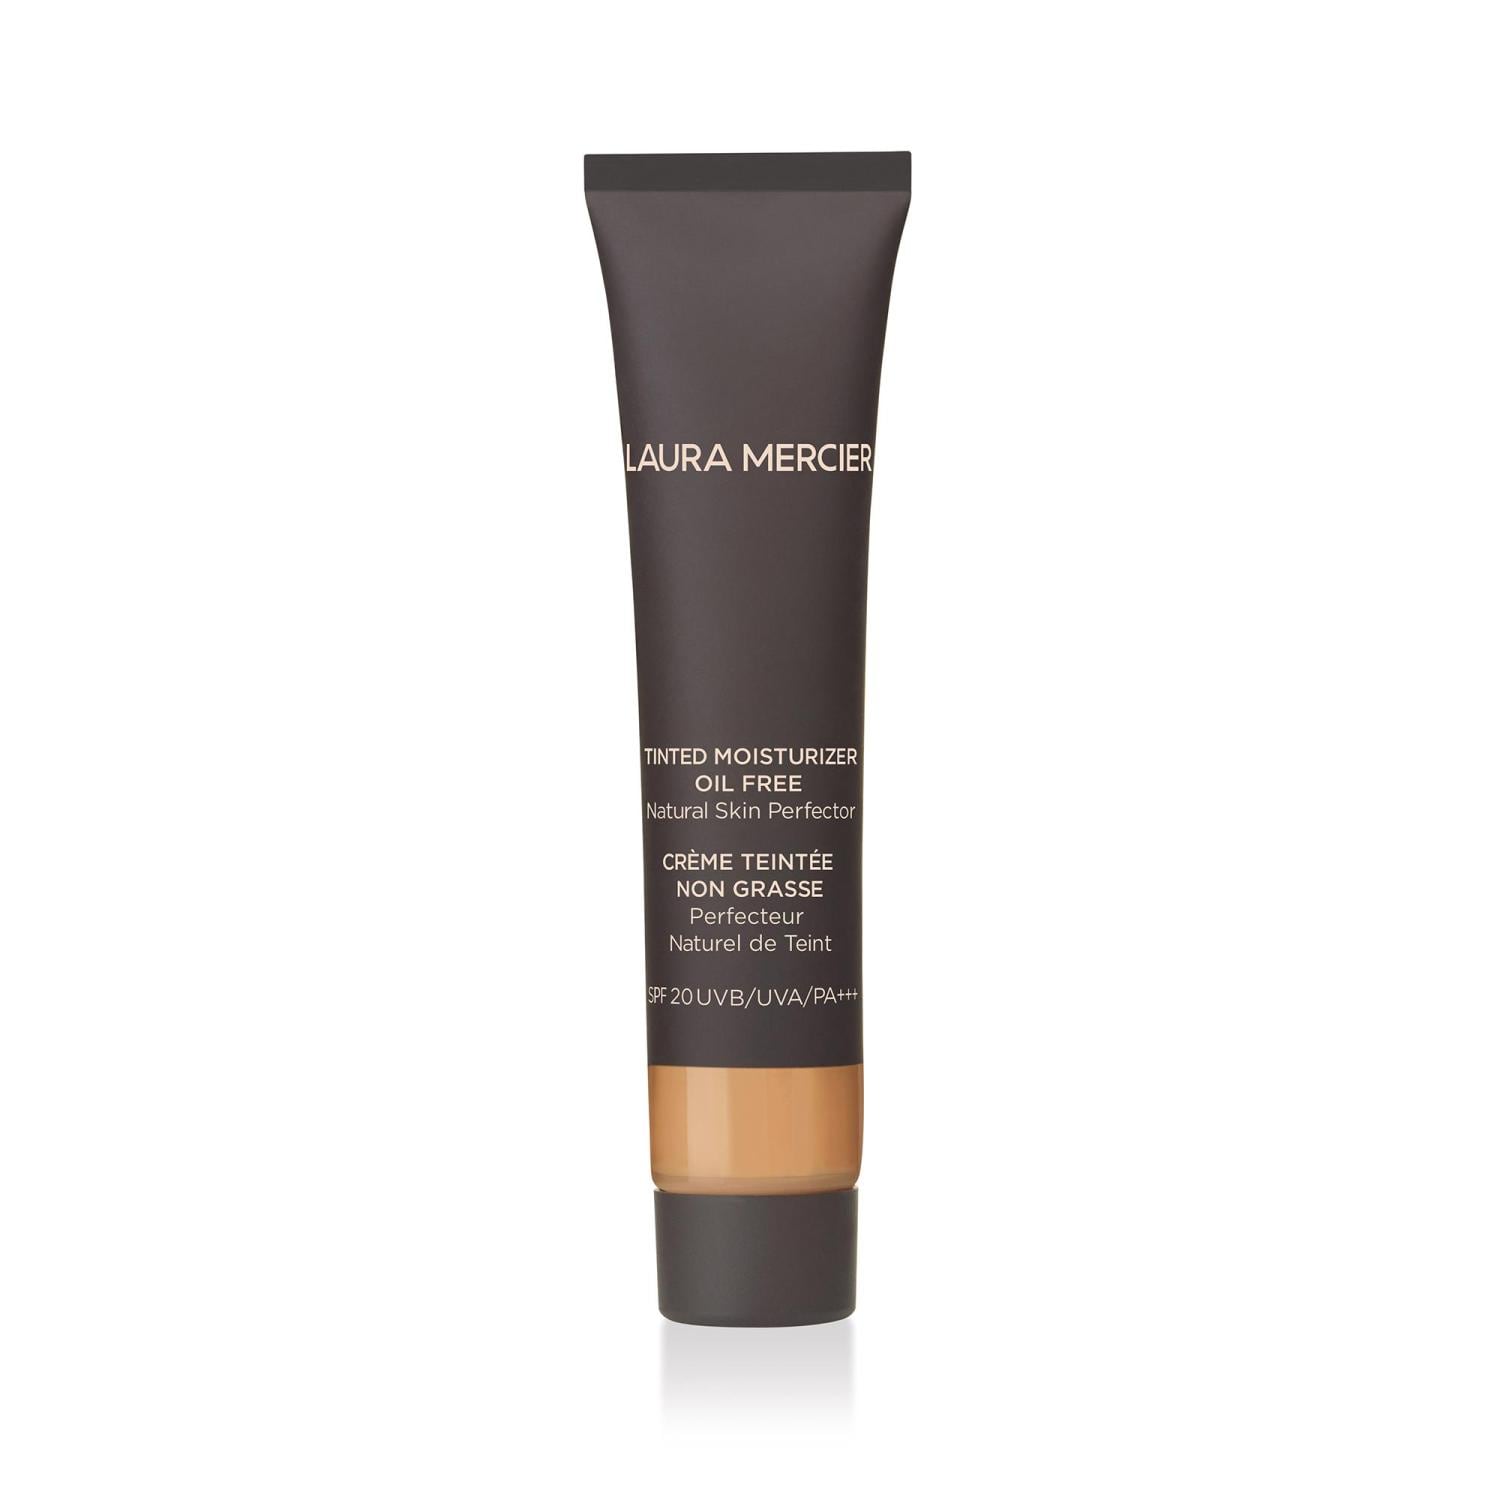 Laura Mercier Beauty To Go Tinted Moisturizer Oil Free Natural Skin Perfector SPF 20 - Travel Size, Nr. 3N1 - SAND